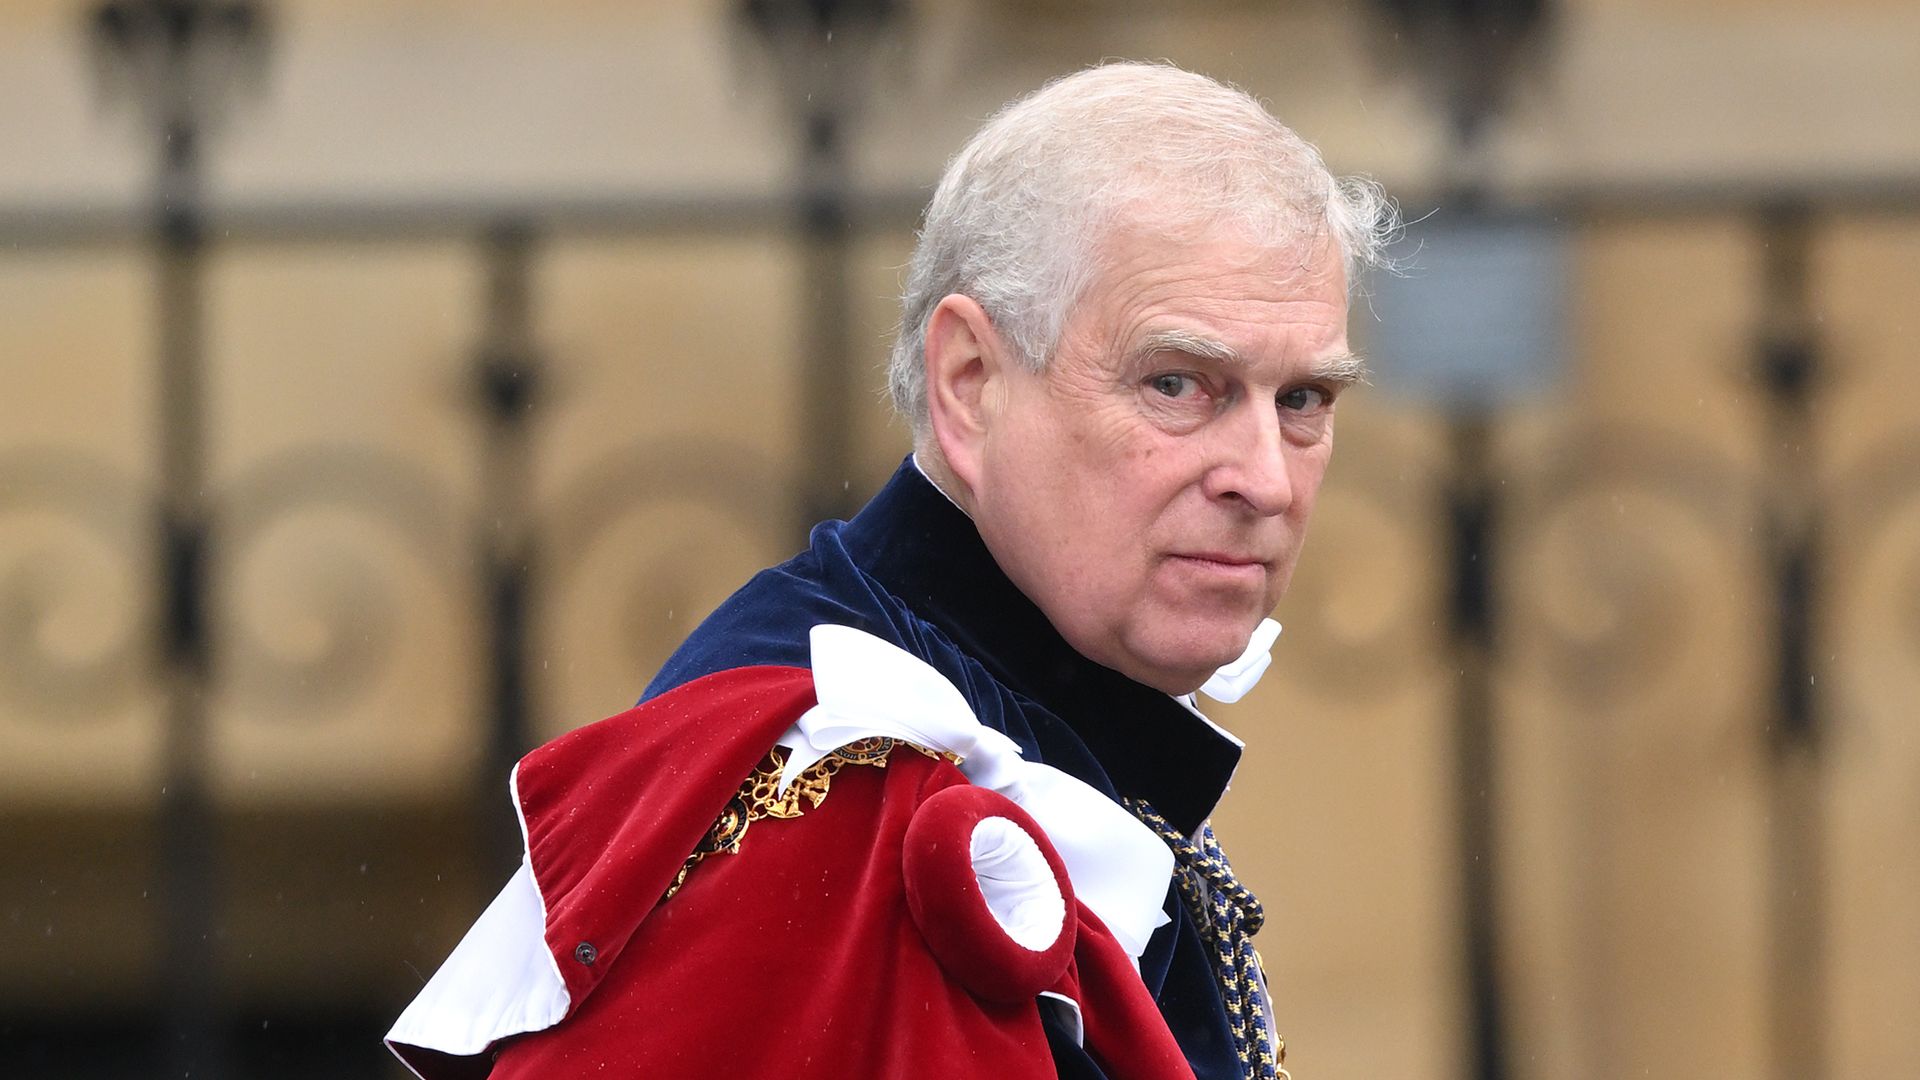 Prince Andrew at 